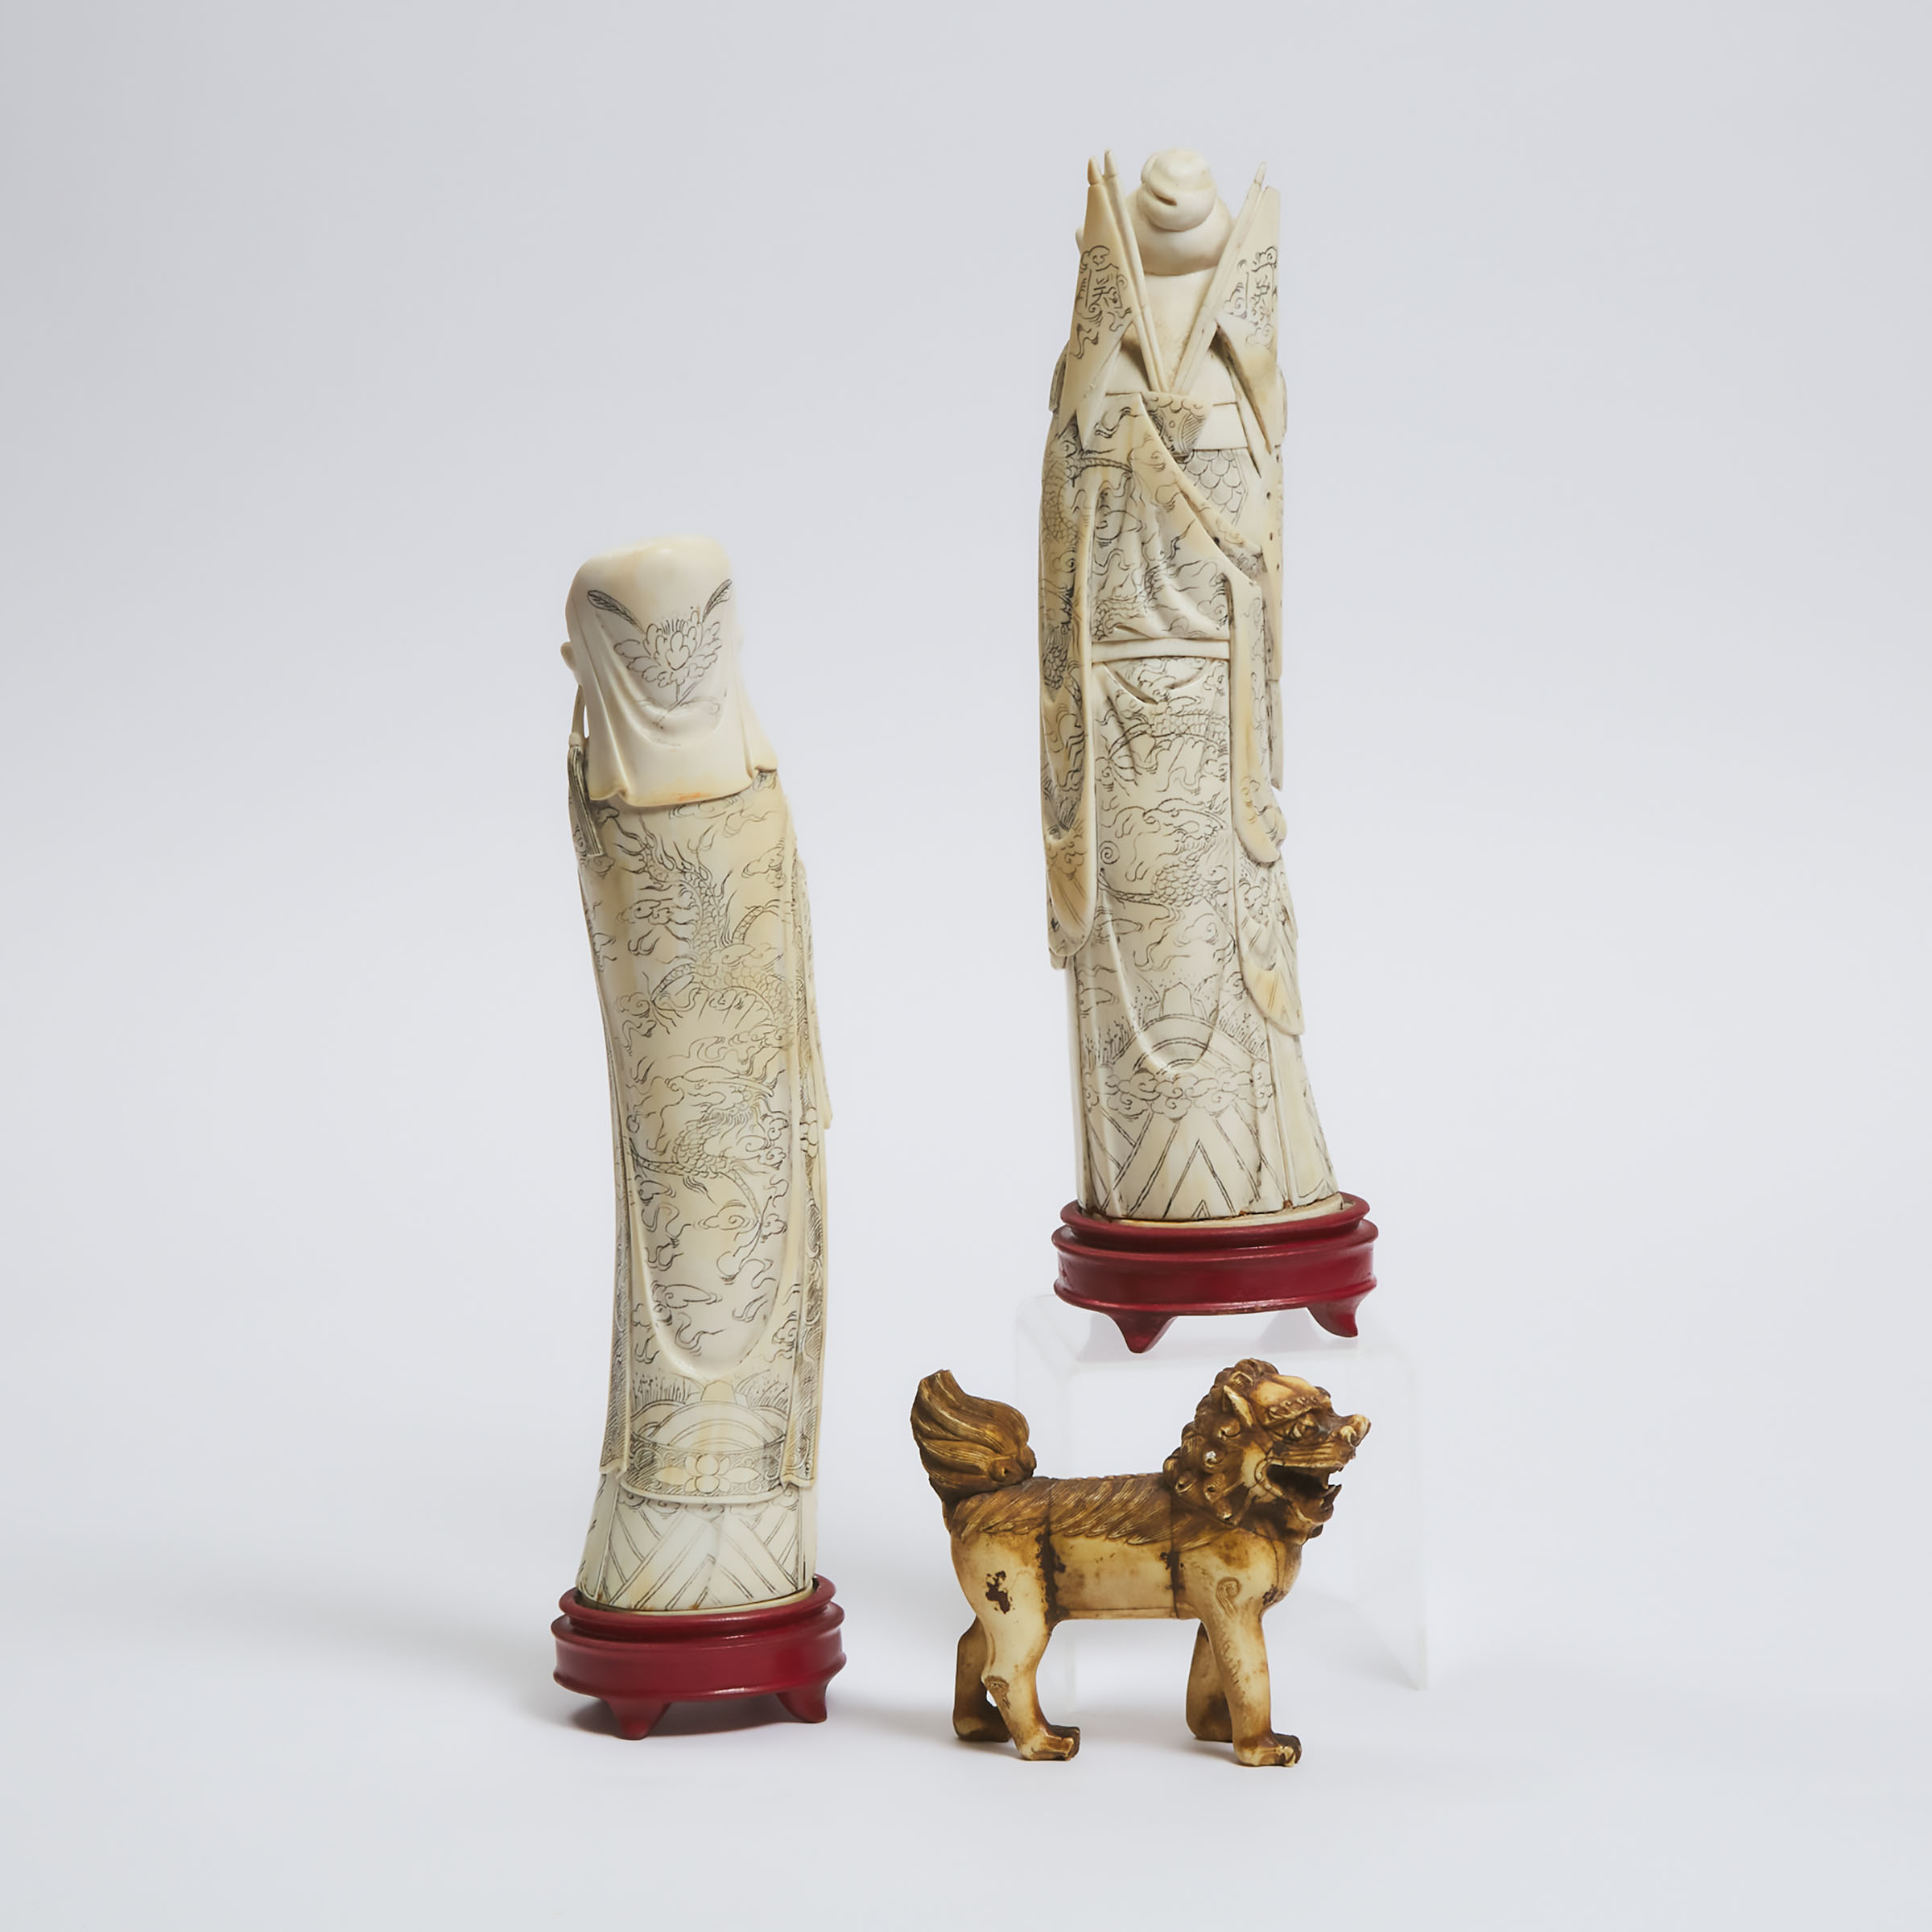 A Pair of Ivory Figures of a General and a Scholar, Together With a Foo Lion, Early to Mid 20th Century